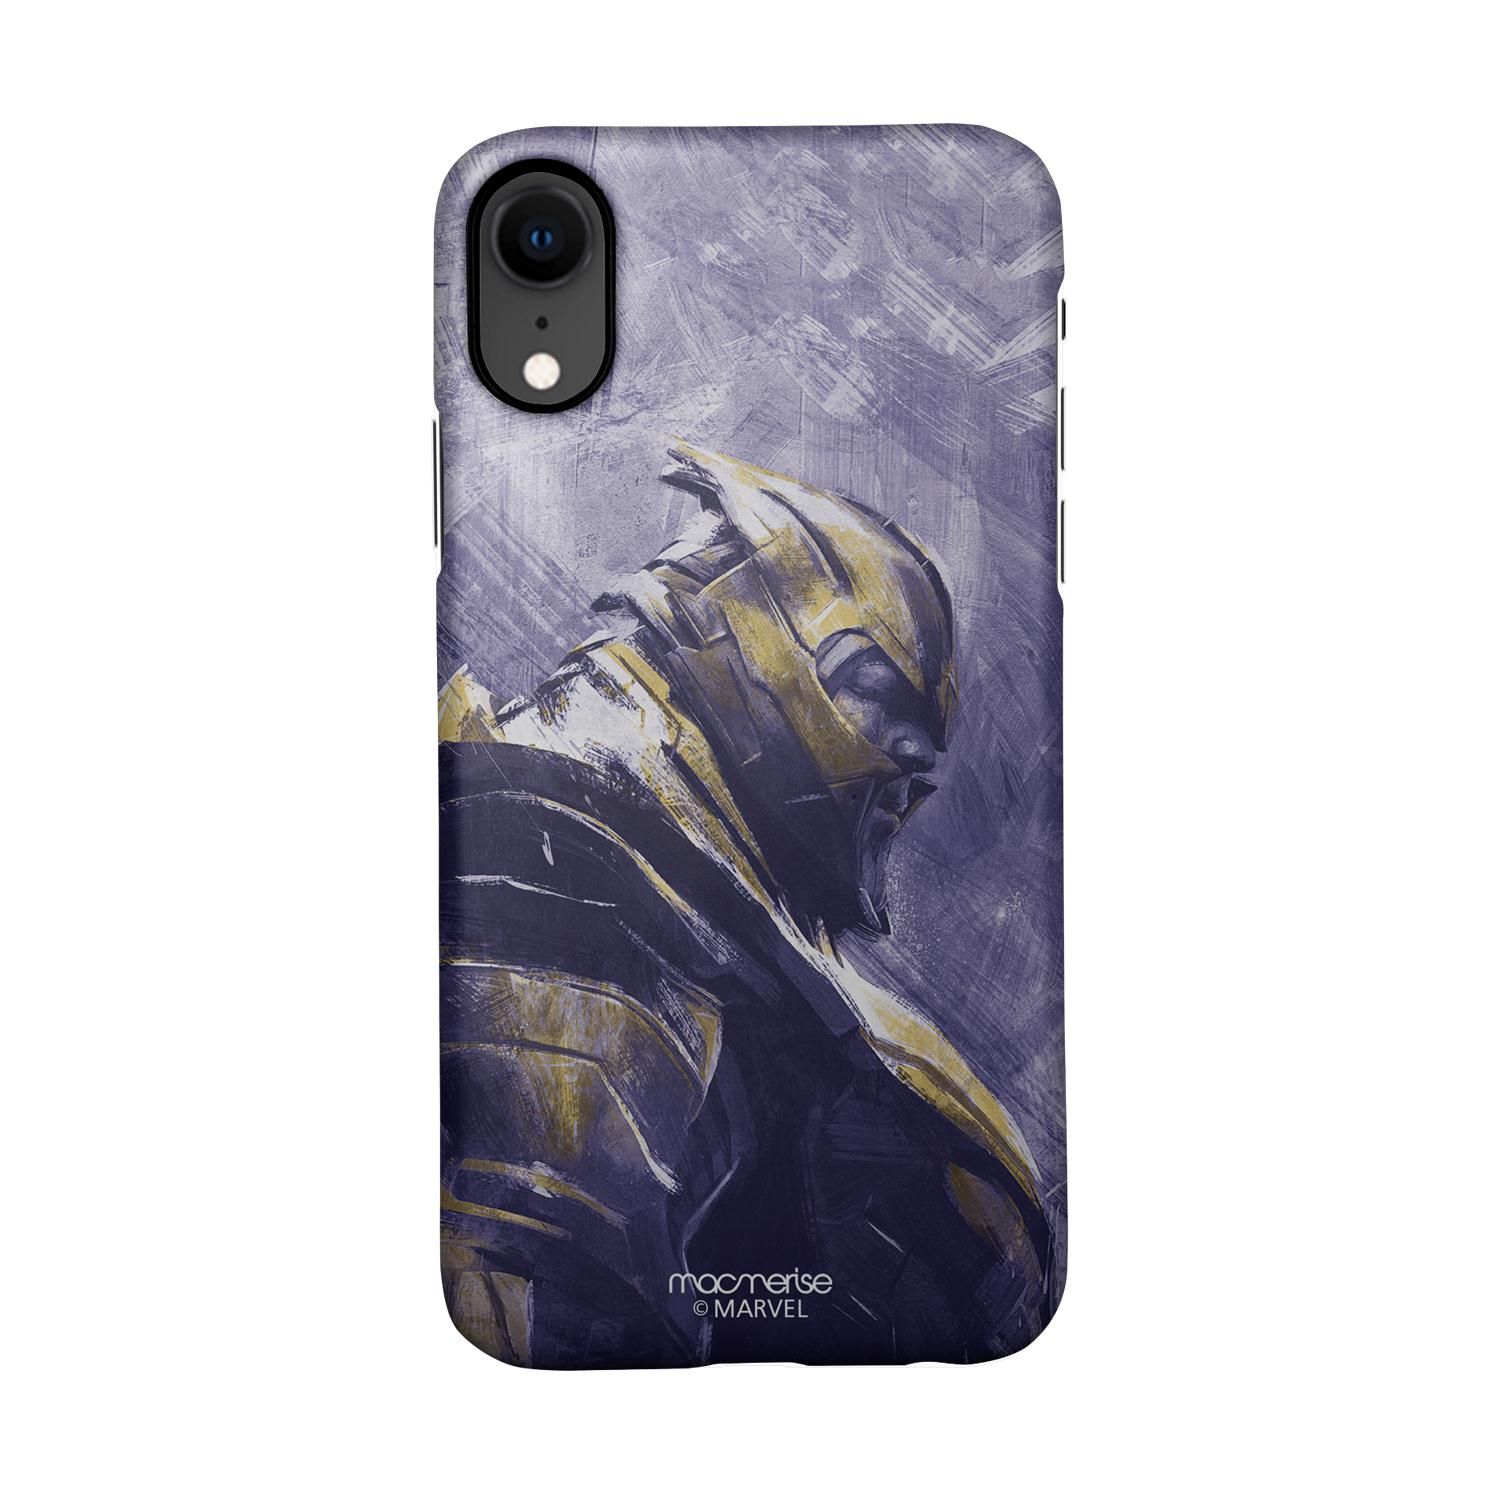 Buy Thanos suited up - Sleek Phone Case for iPhone XR Online